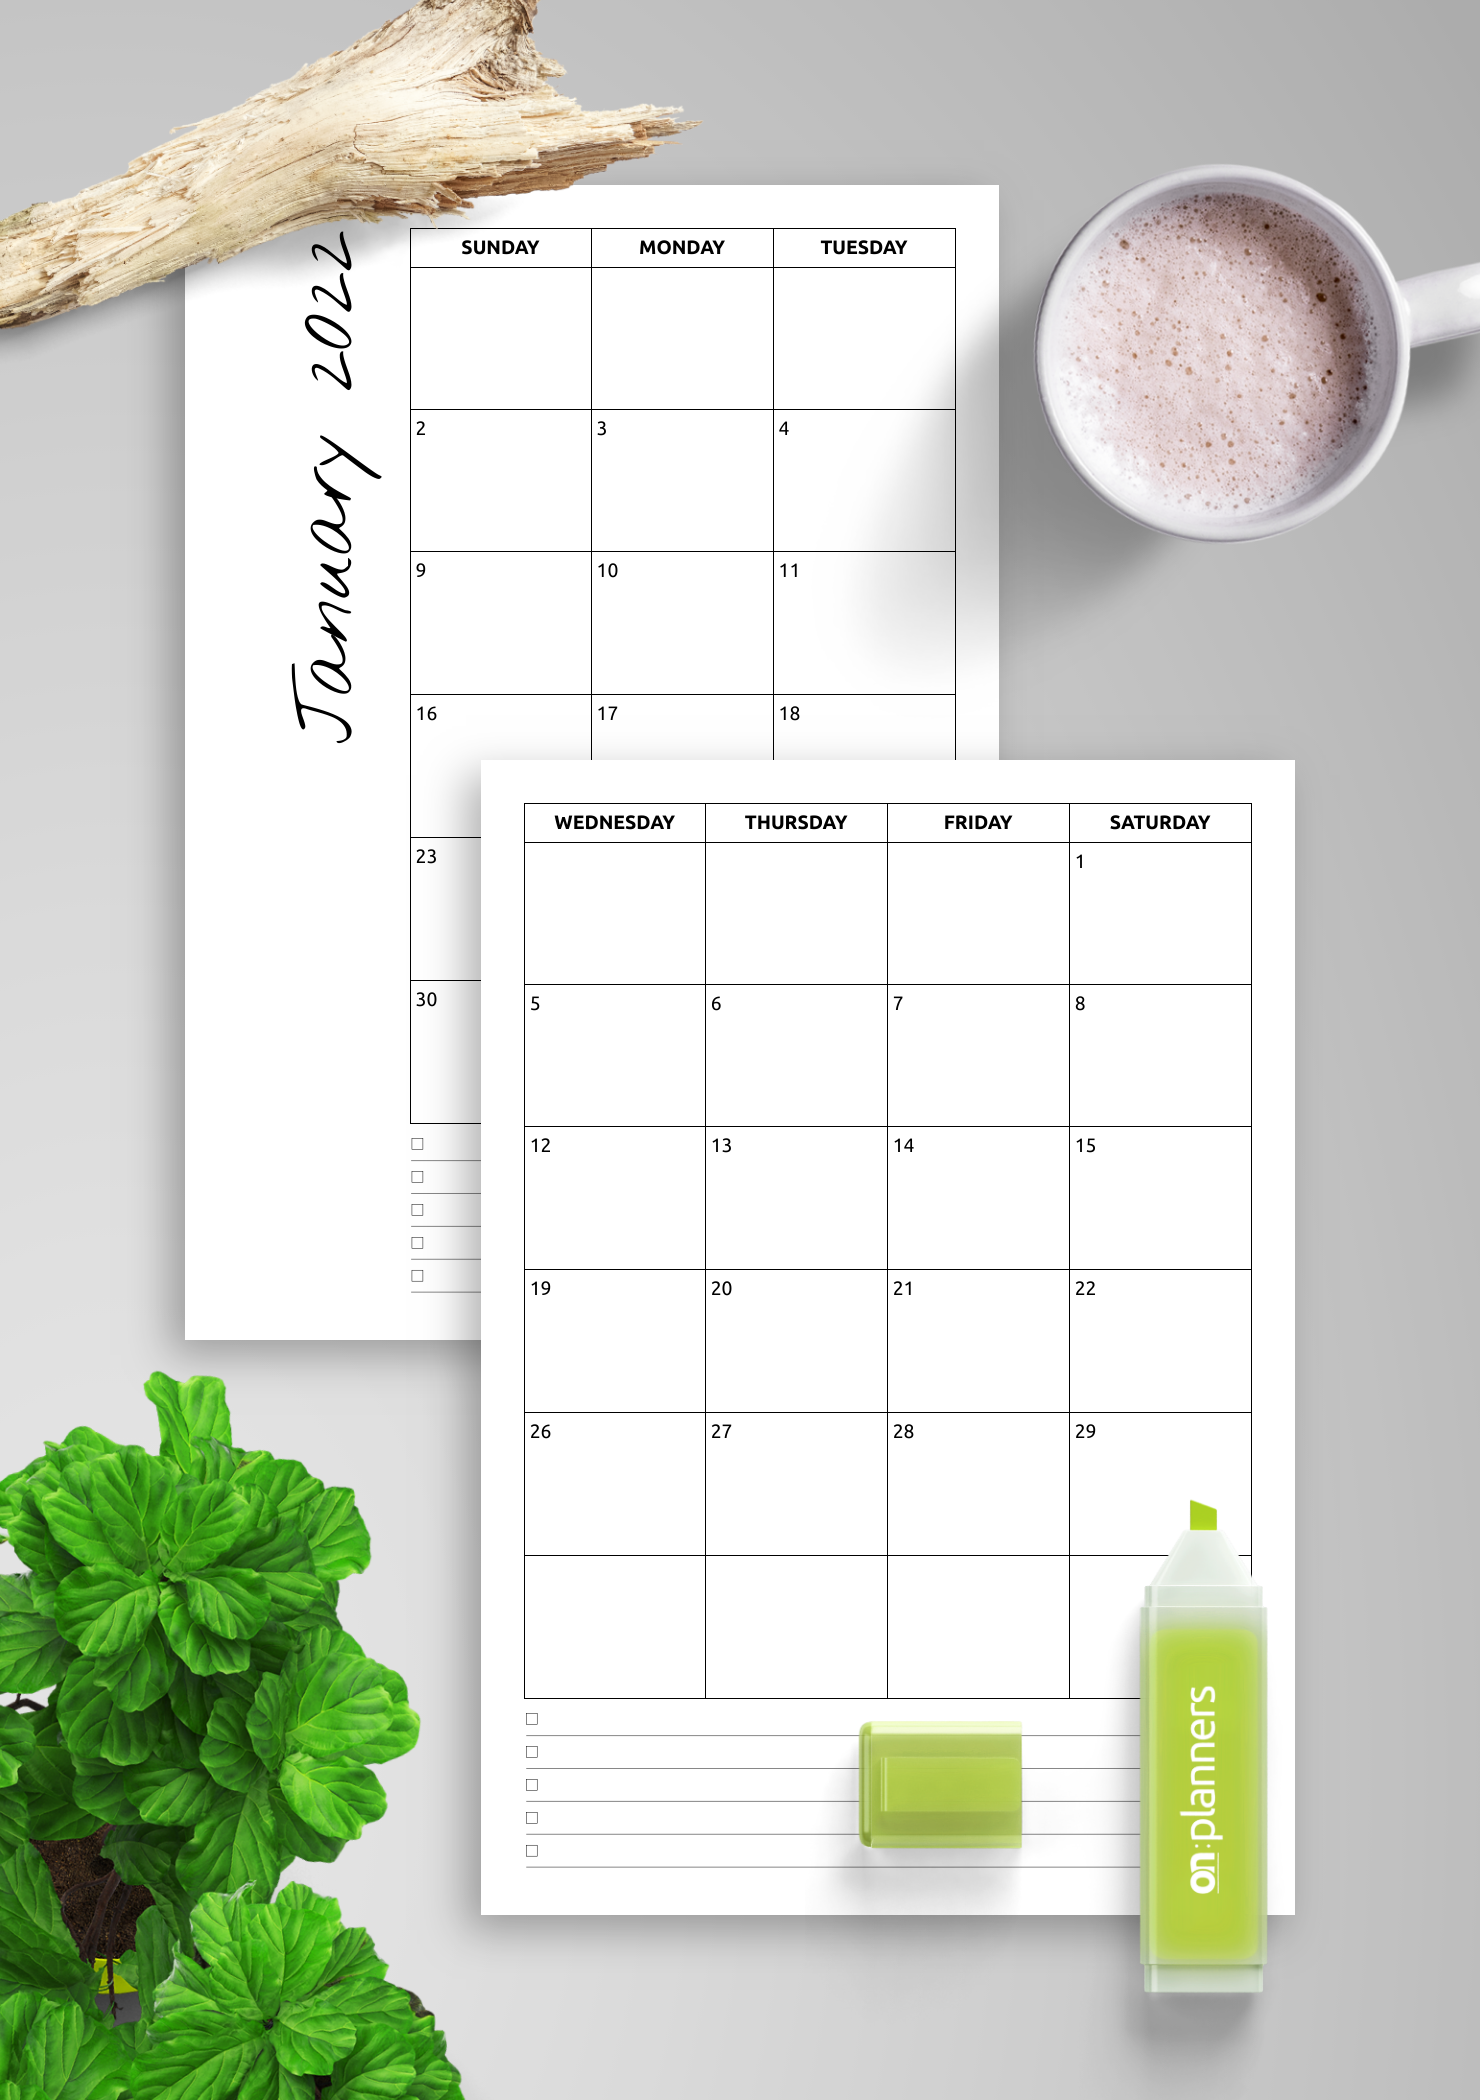 Printable Calendar With Notes - Blank Printable Calendar By Month With